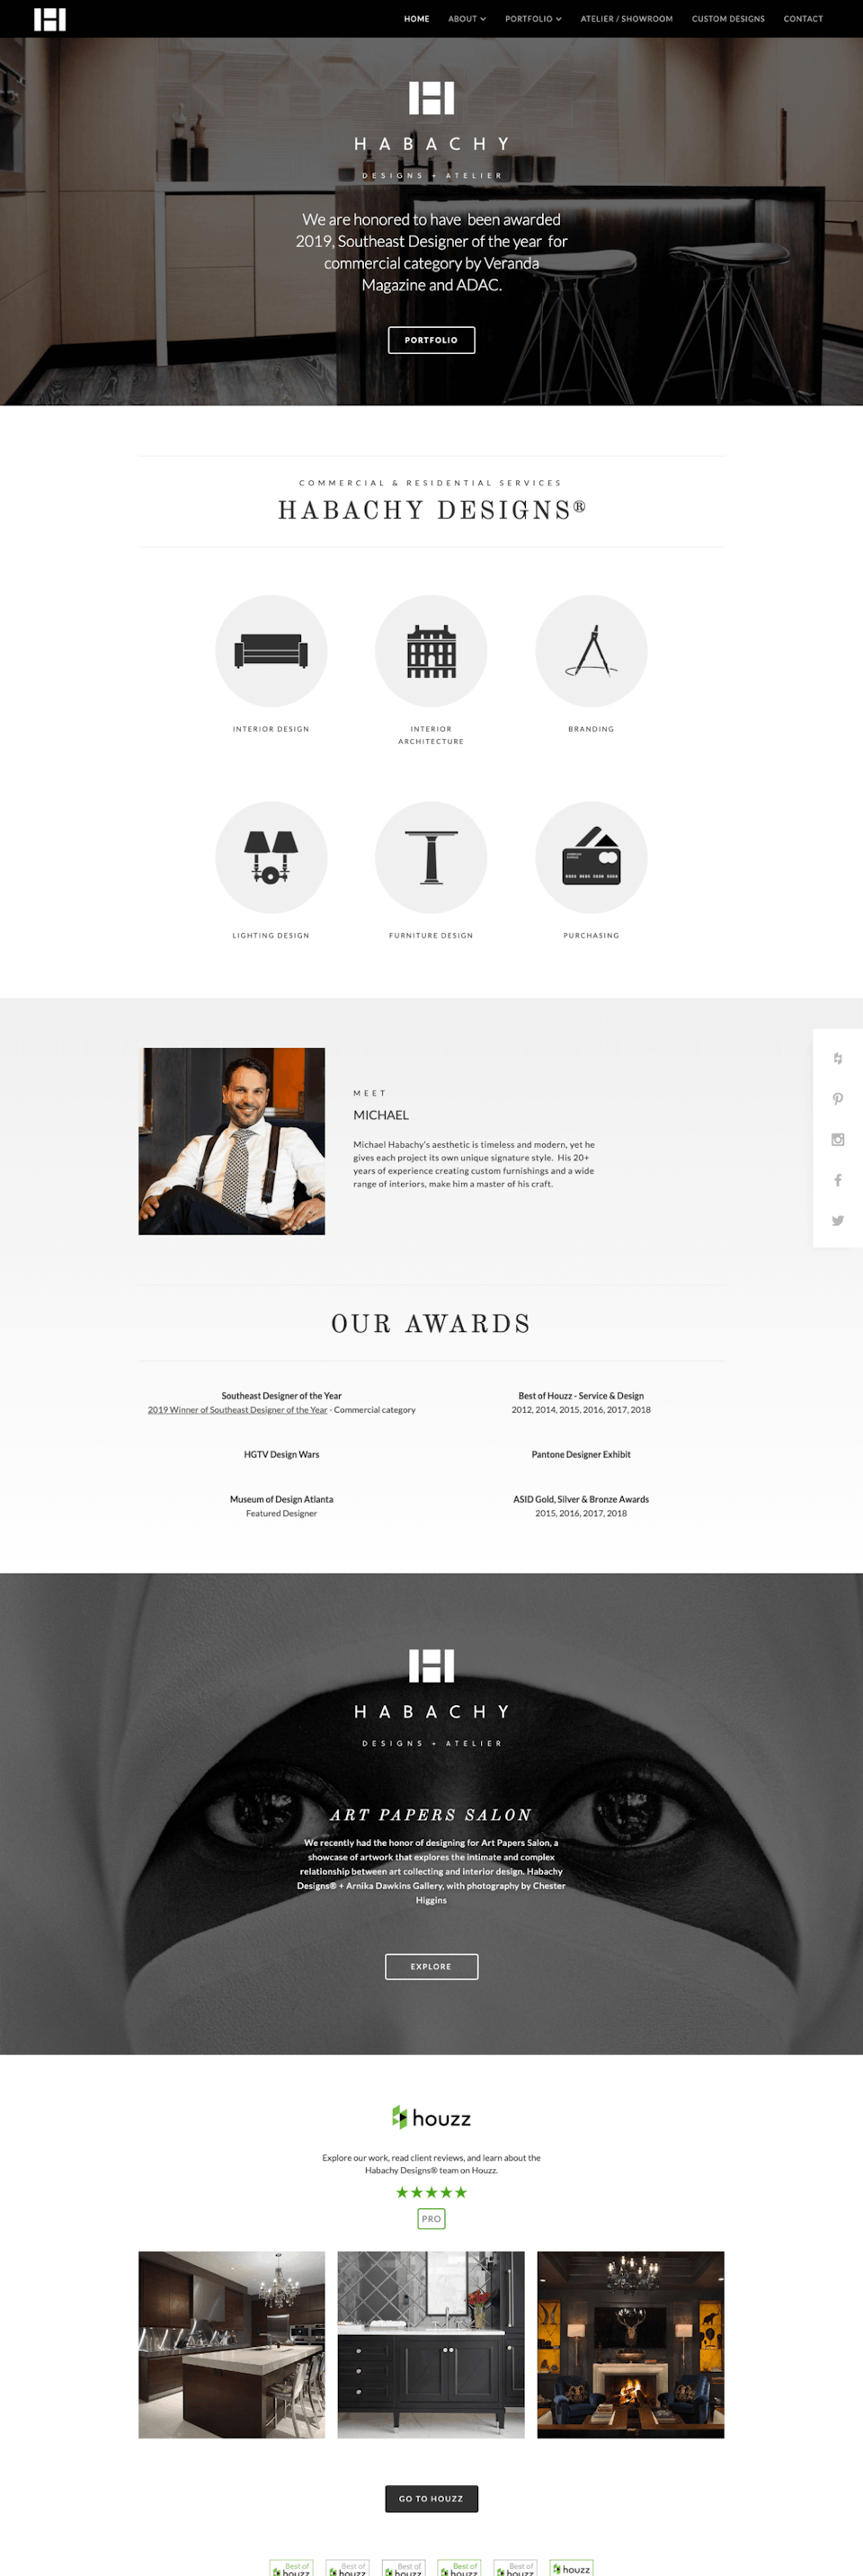 webflow project 1 - Habachy Designs